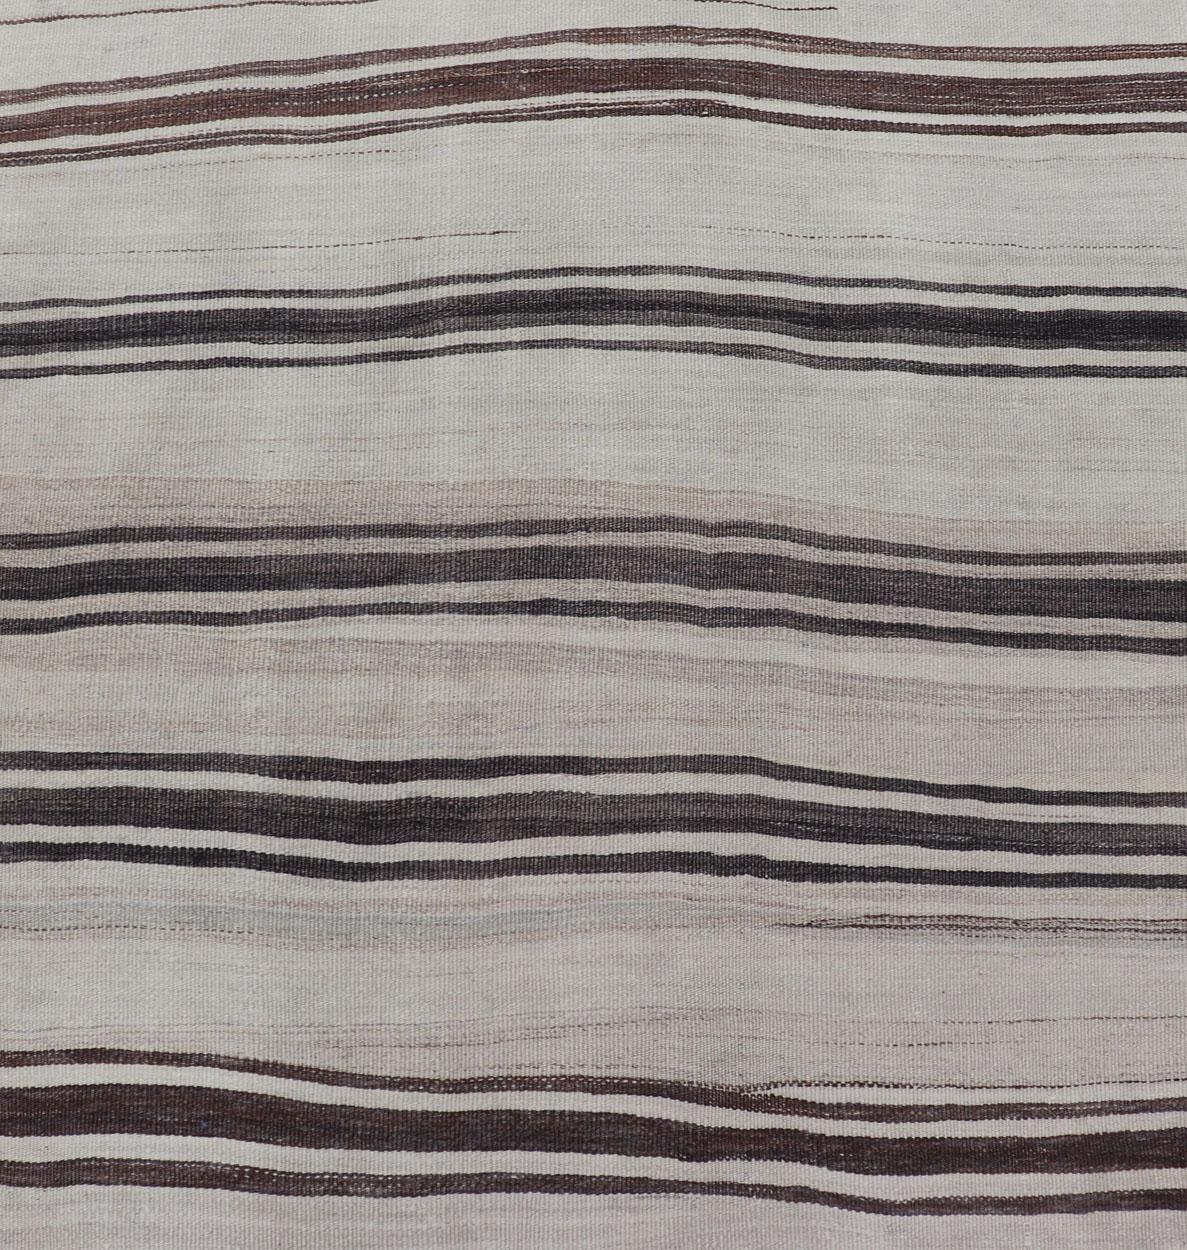 Wool Turkish Vintage Flat-Weave in Shades of Brown and Ivory with Stripe Design For Sale